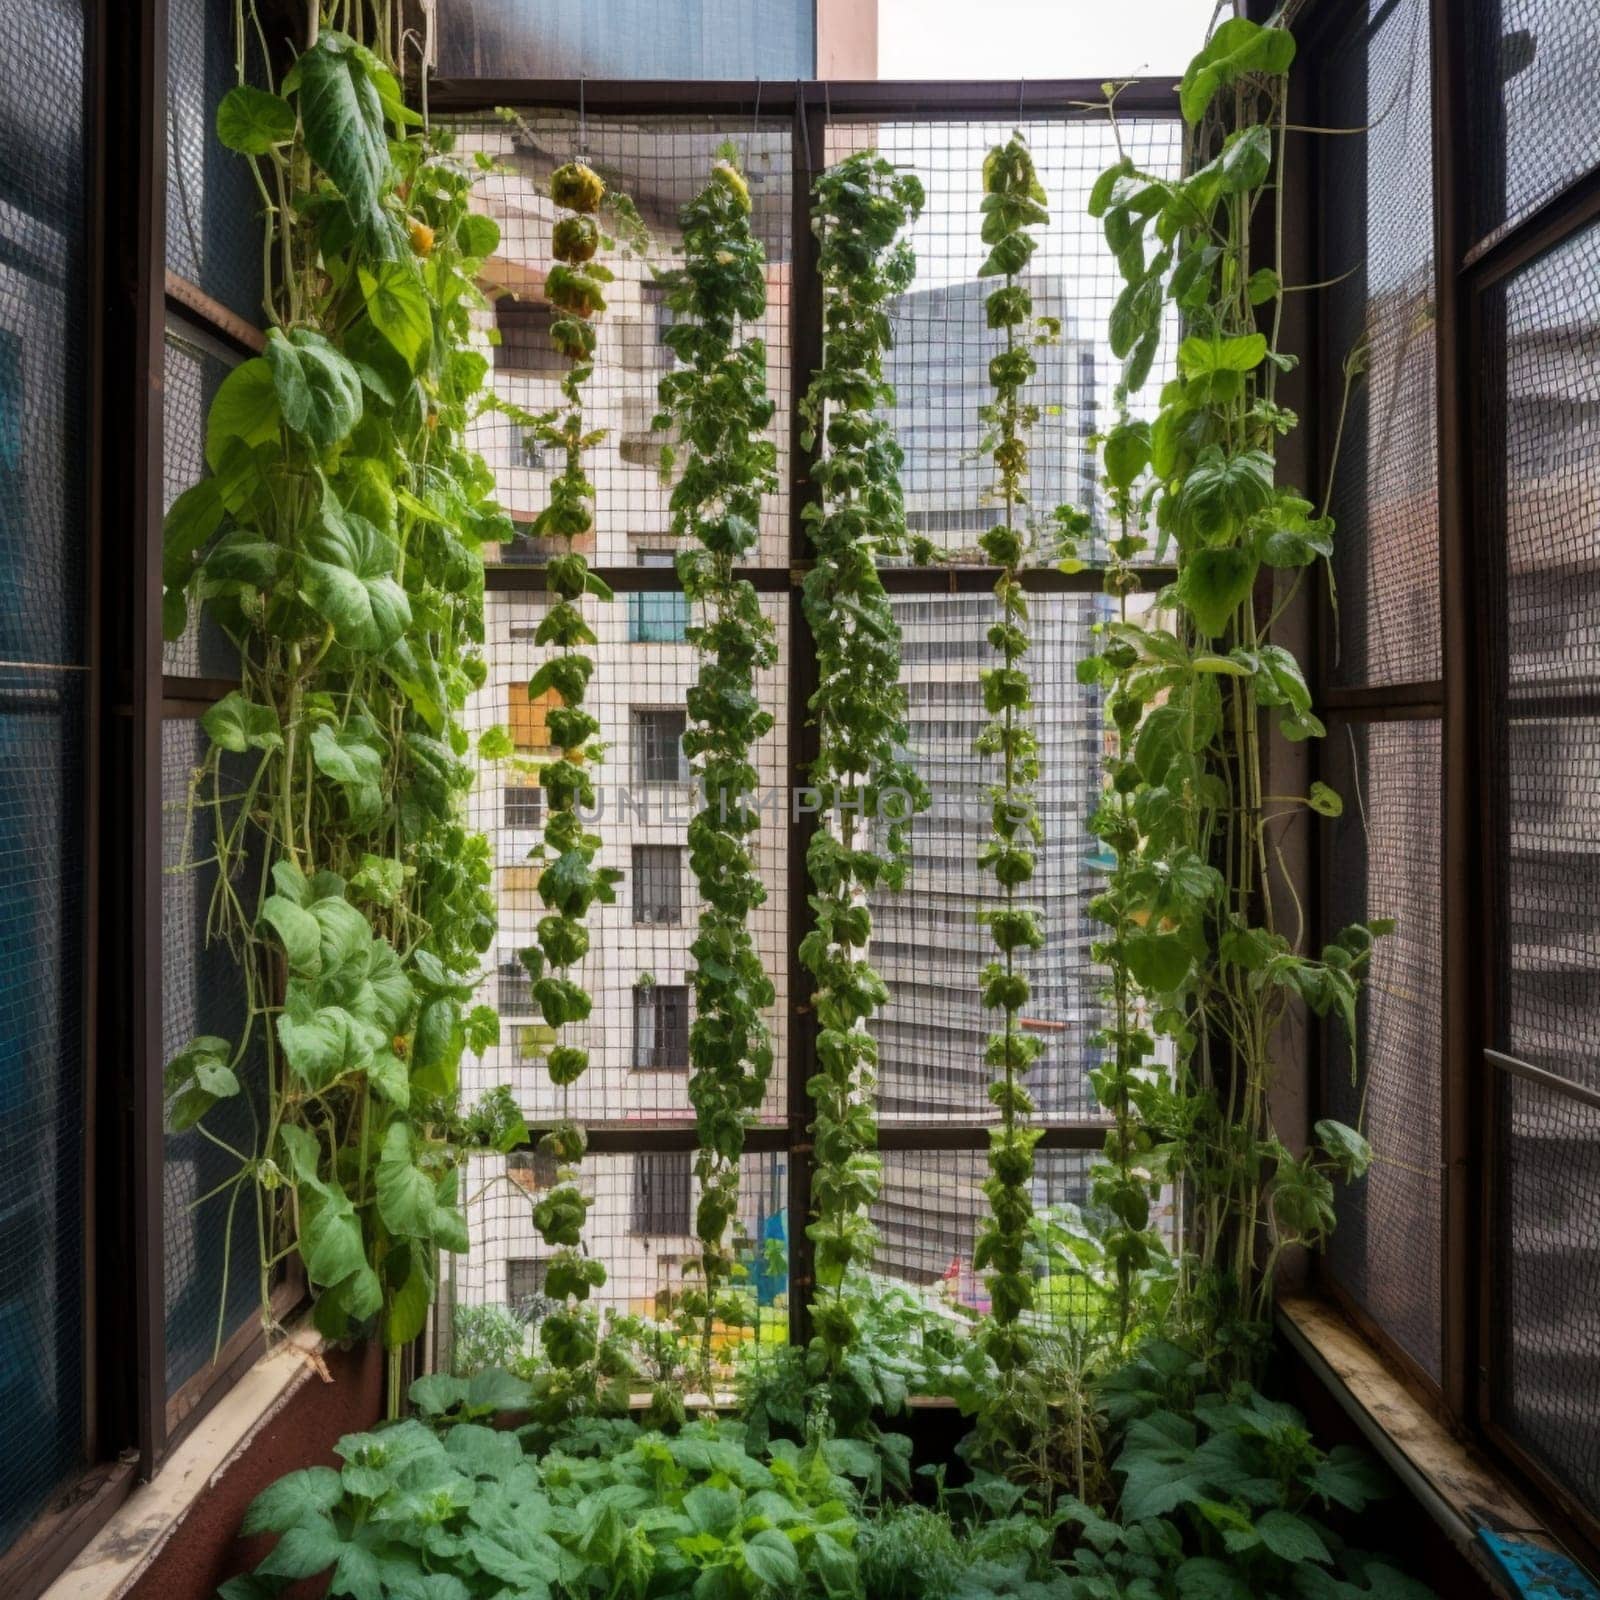 This image captures the sense of innovation and creativity that comes from growing a garden vertically up the side of a building on a bustling city street. The garden is filled with vibrant plants and flowers that thrive in the urban environment. The image conveys the sense of beauty and possibility that comes from seeing something unexpected and unconventional growing in the heart of the city.